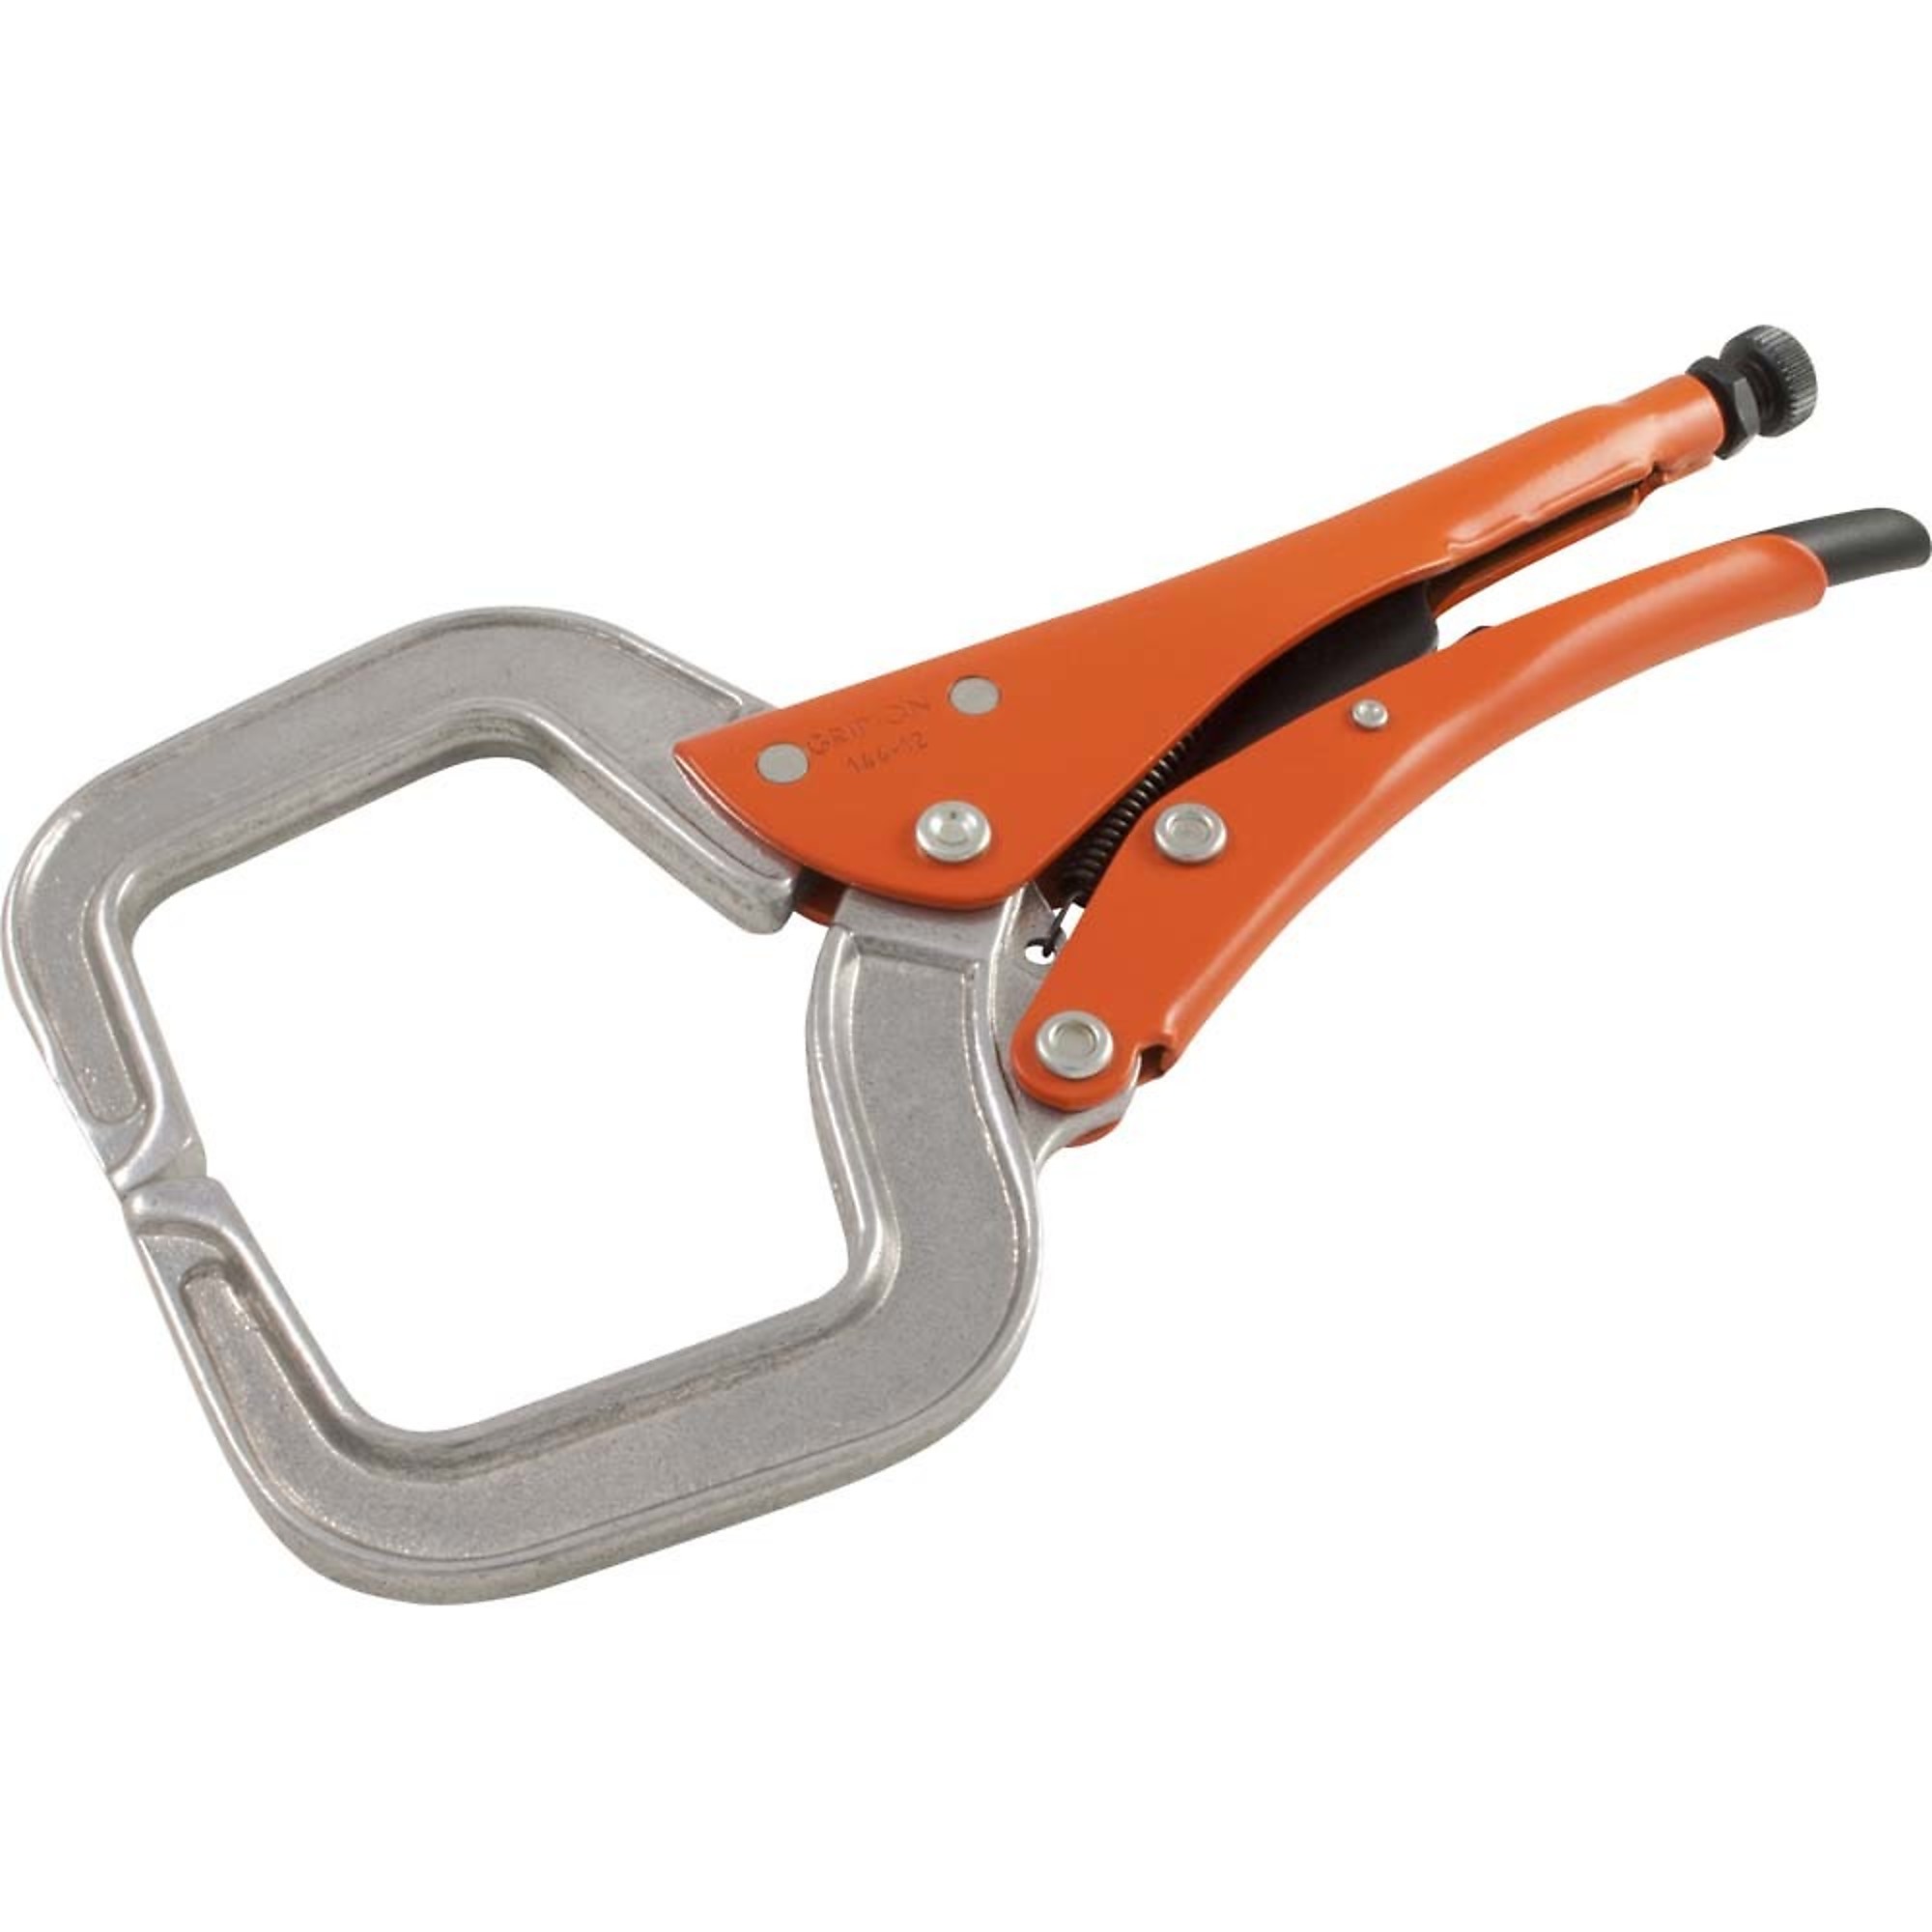 Grip-on, 12Inch Locking Aluminum Alloy C-clamp, Pieces (qty.) 1 Material Alloy Steel, Jaw Capacity 4.33 in, Model 144-12